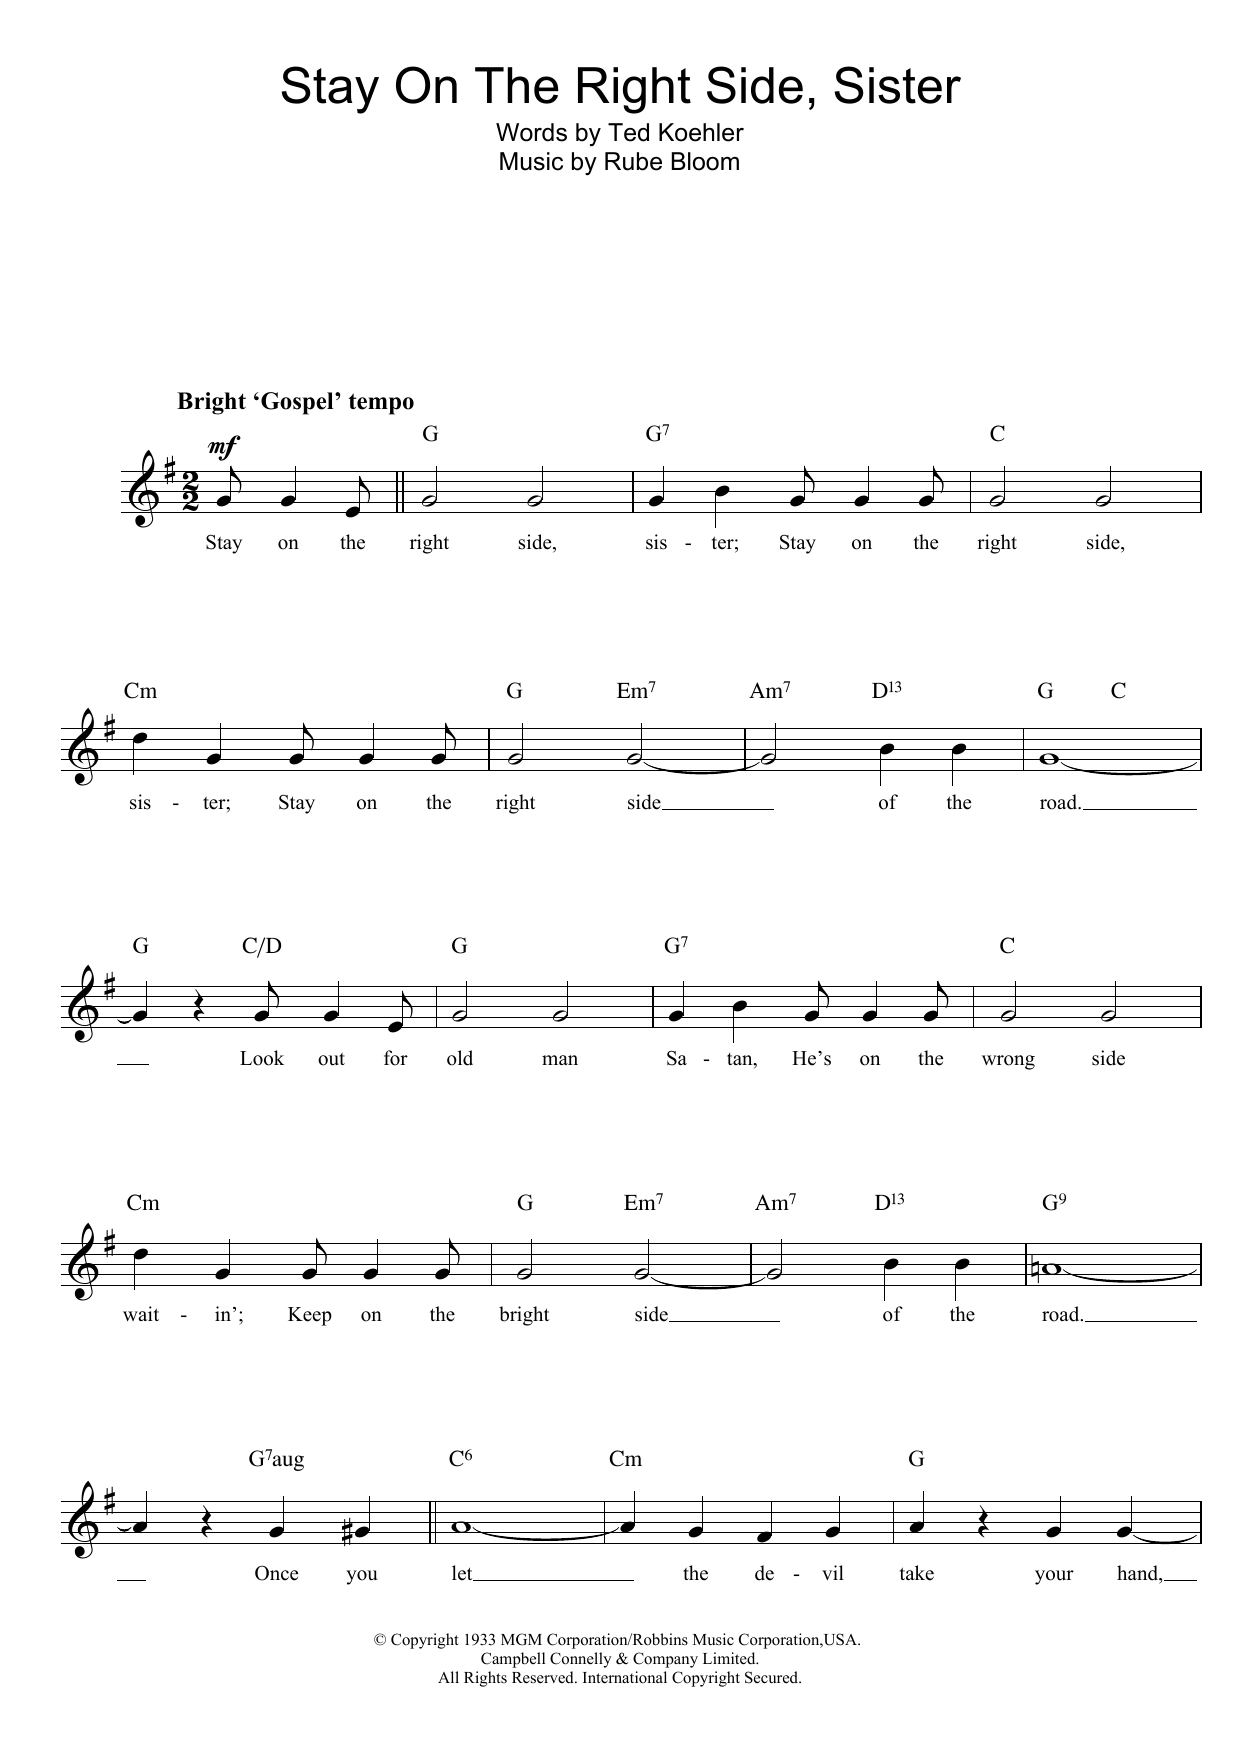 Download Rube Bloom Stay On The Right Side Sister Sheet Music